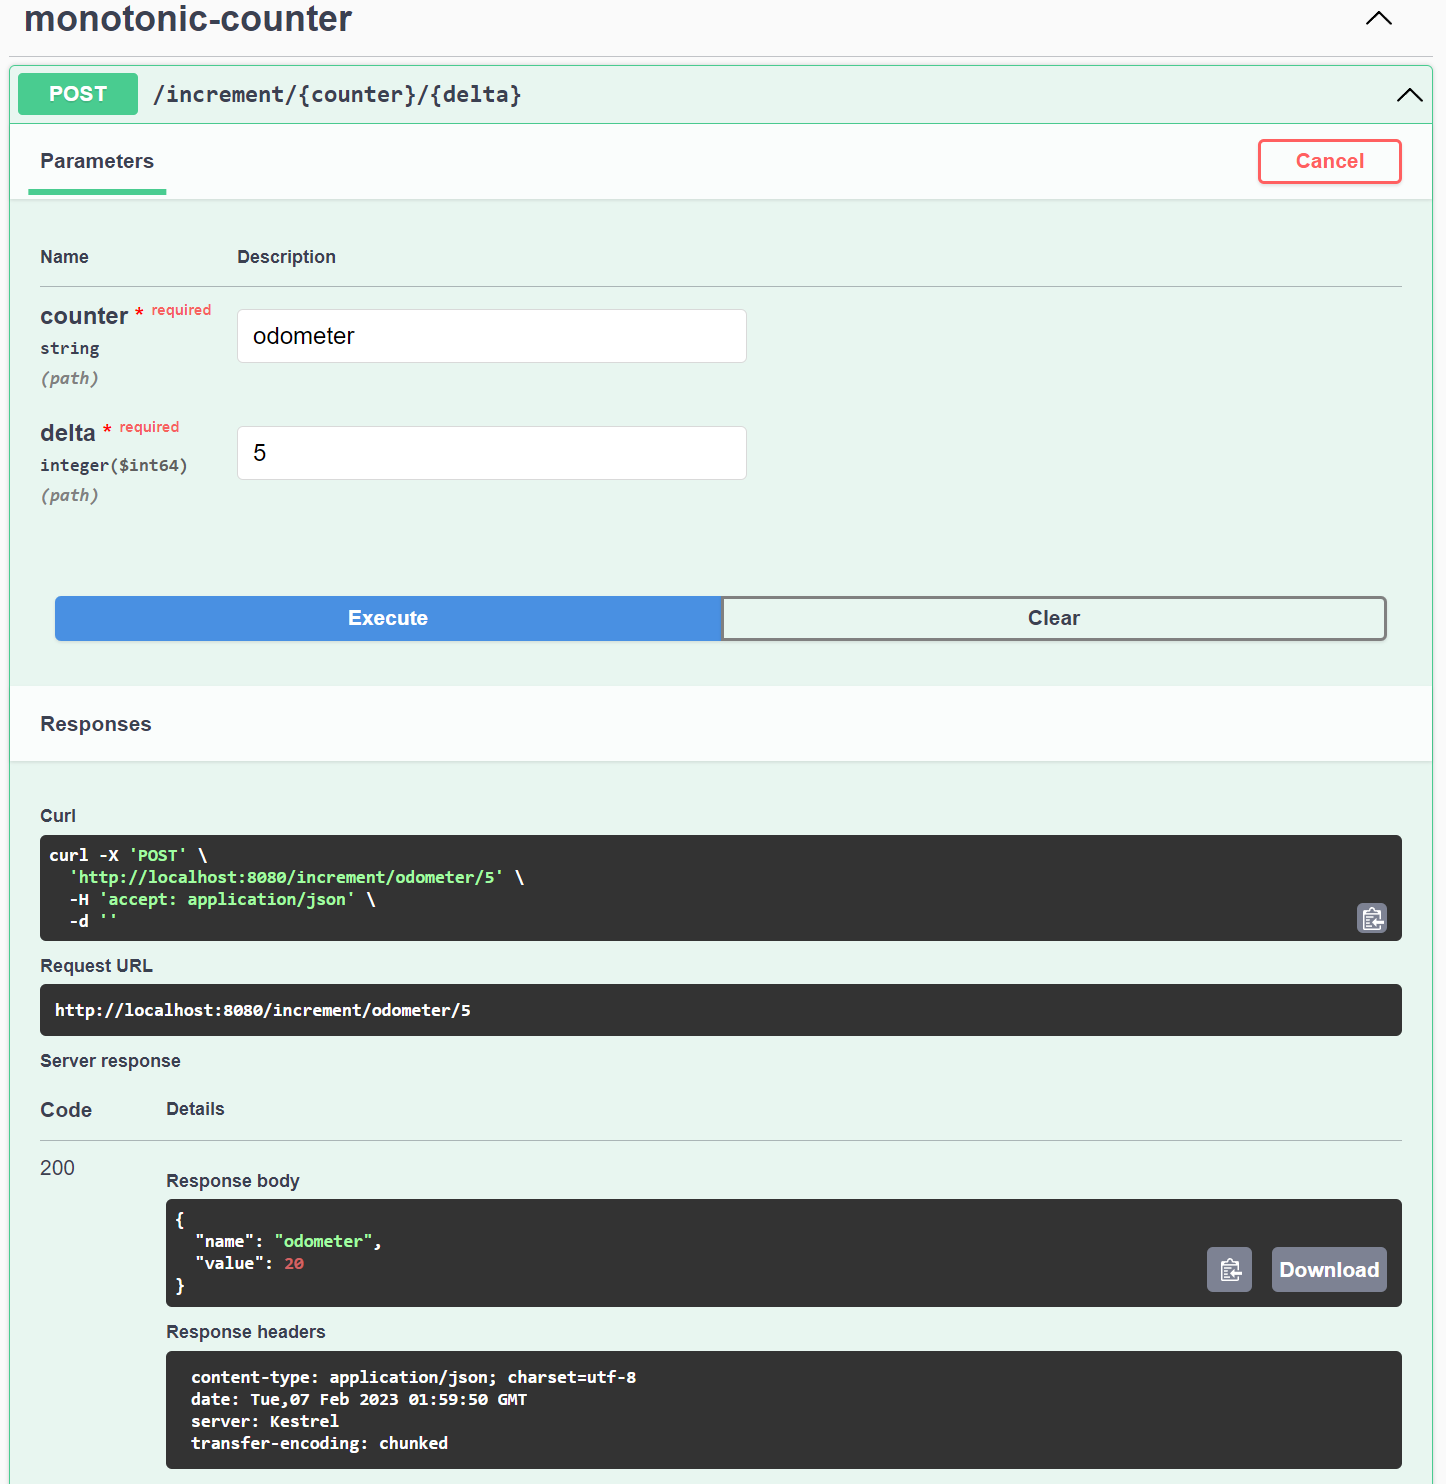 Swagger UI of the Monotonic Counter service. The user is sending an HTTP POST request to /increment/{counter}